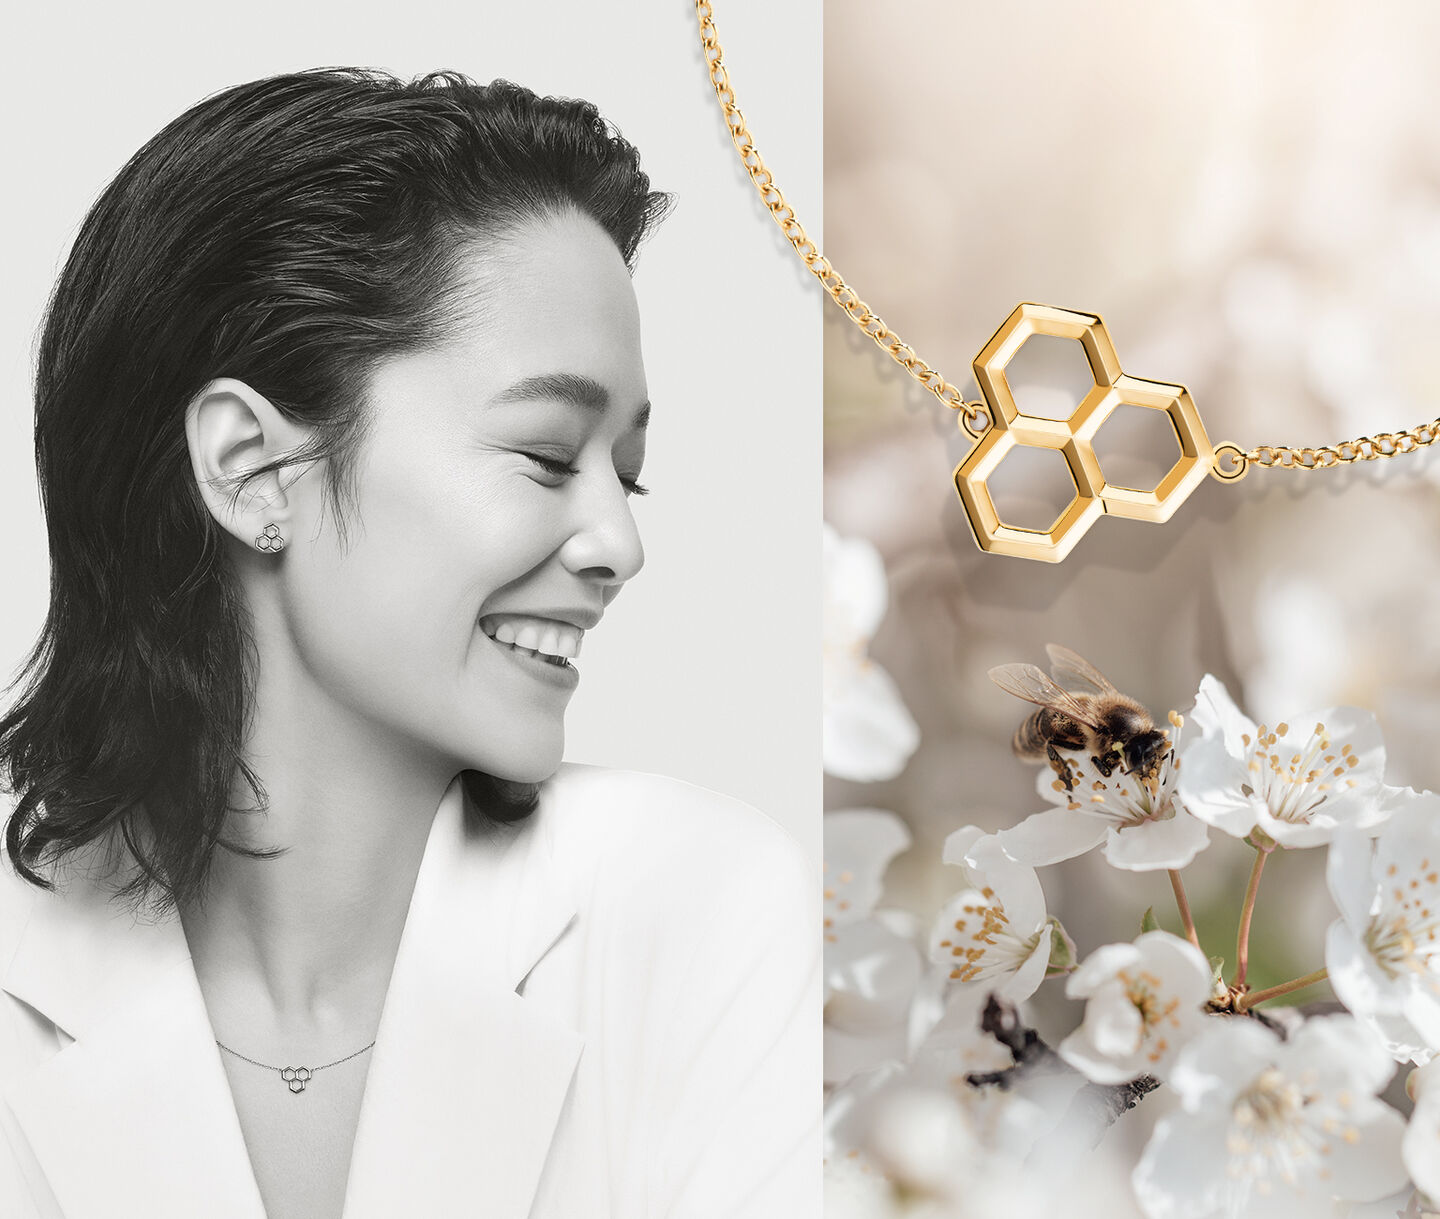 on the left a black and white model, on the right a honeycomb gold pendant.